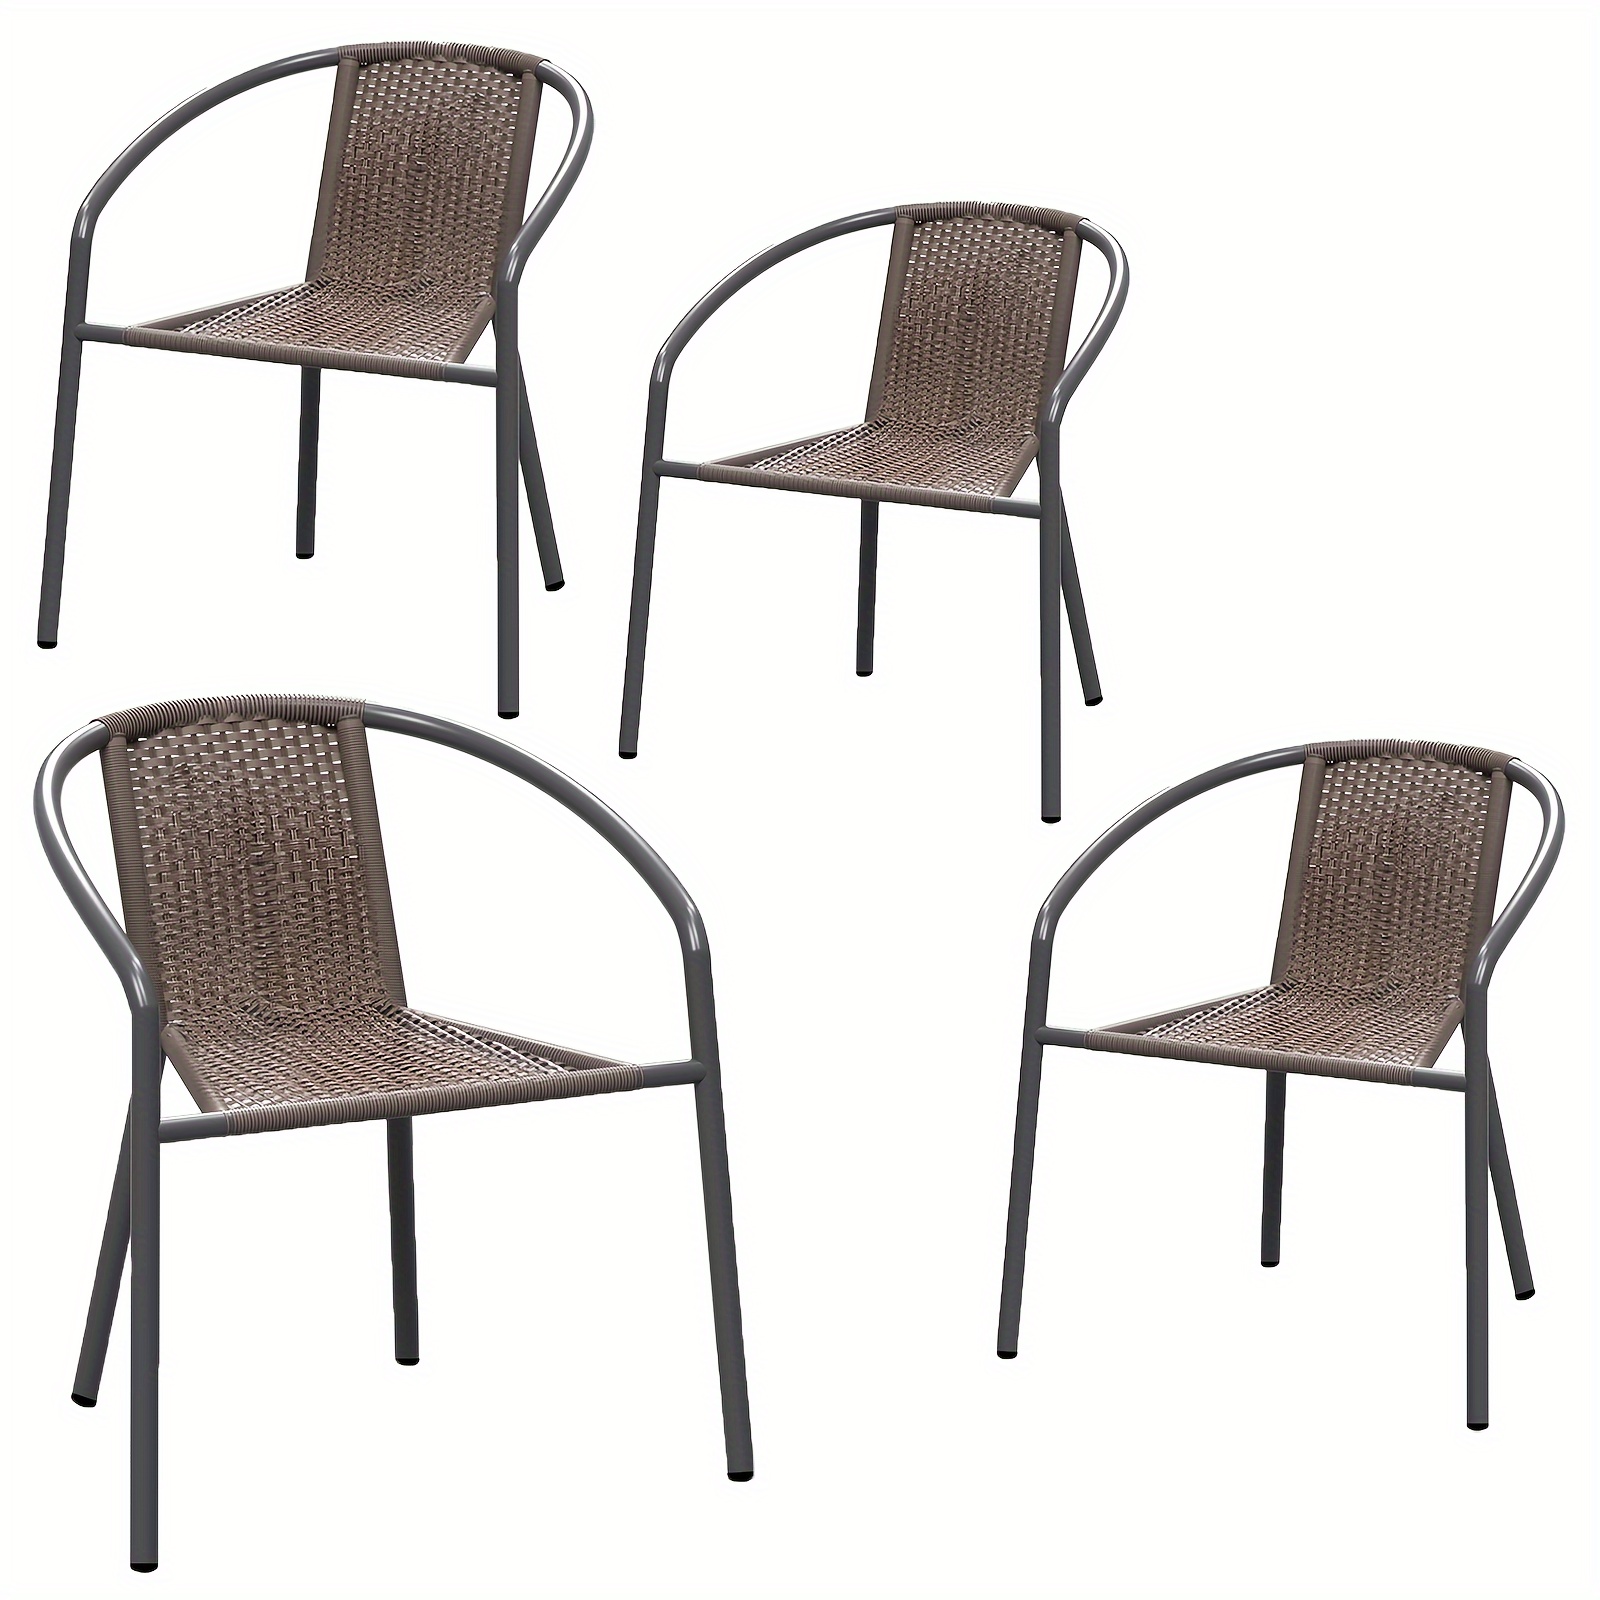 

Modern Rattan Outdoor, Indoor Bedroom Restaurant Dining Chairs, Stackable For Patio Or Drawing Room, Set Of 4, Brown